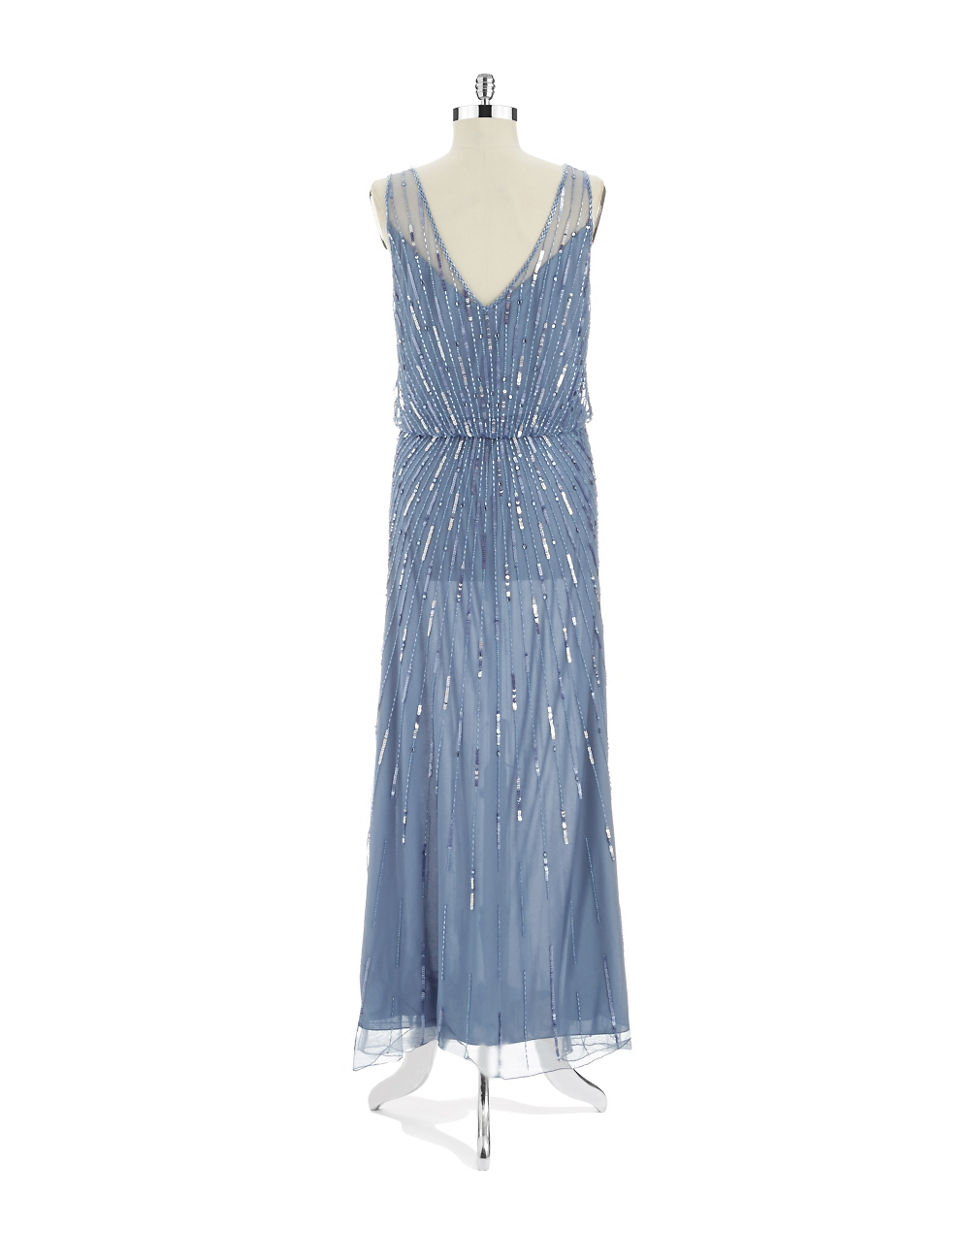 J Kara Beaded And Sequin Gown in Dusty/Blue (Blue) - Lyst